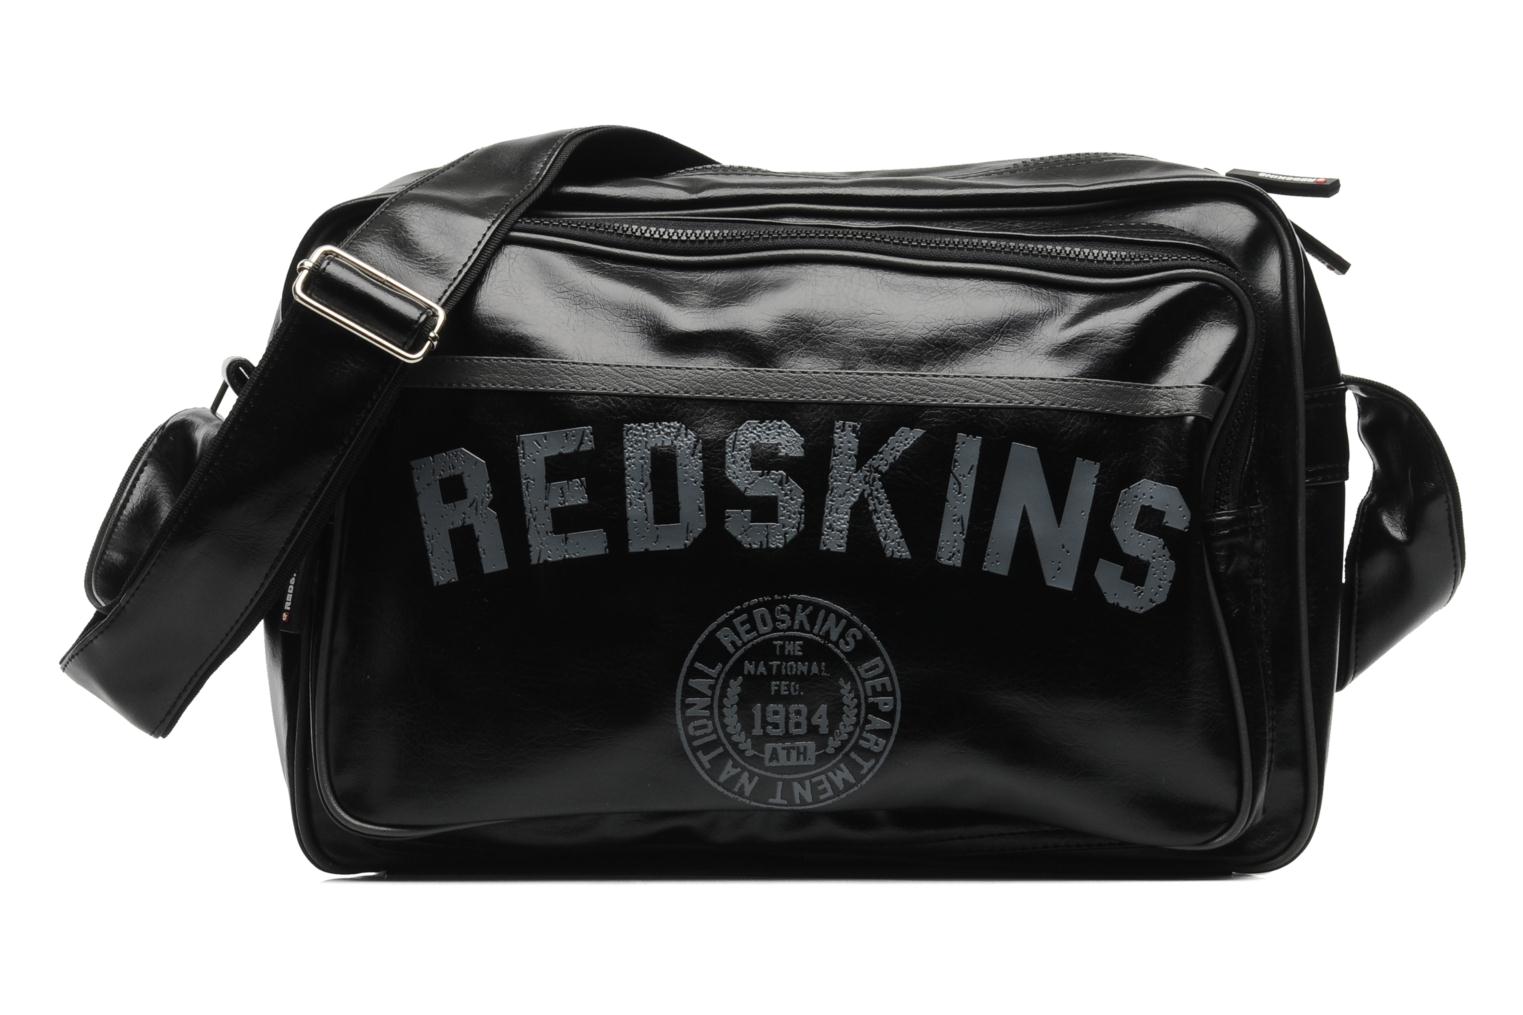 Foto City bags Redskins Airline besace A4 Bolsos y complementos foto 346416